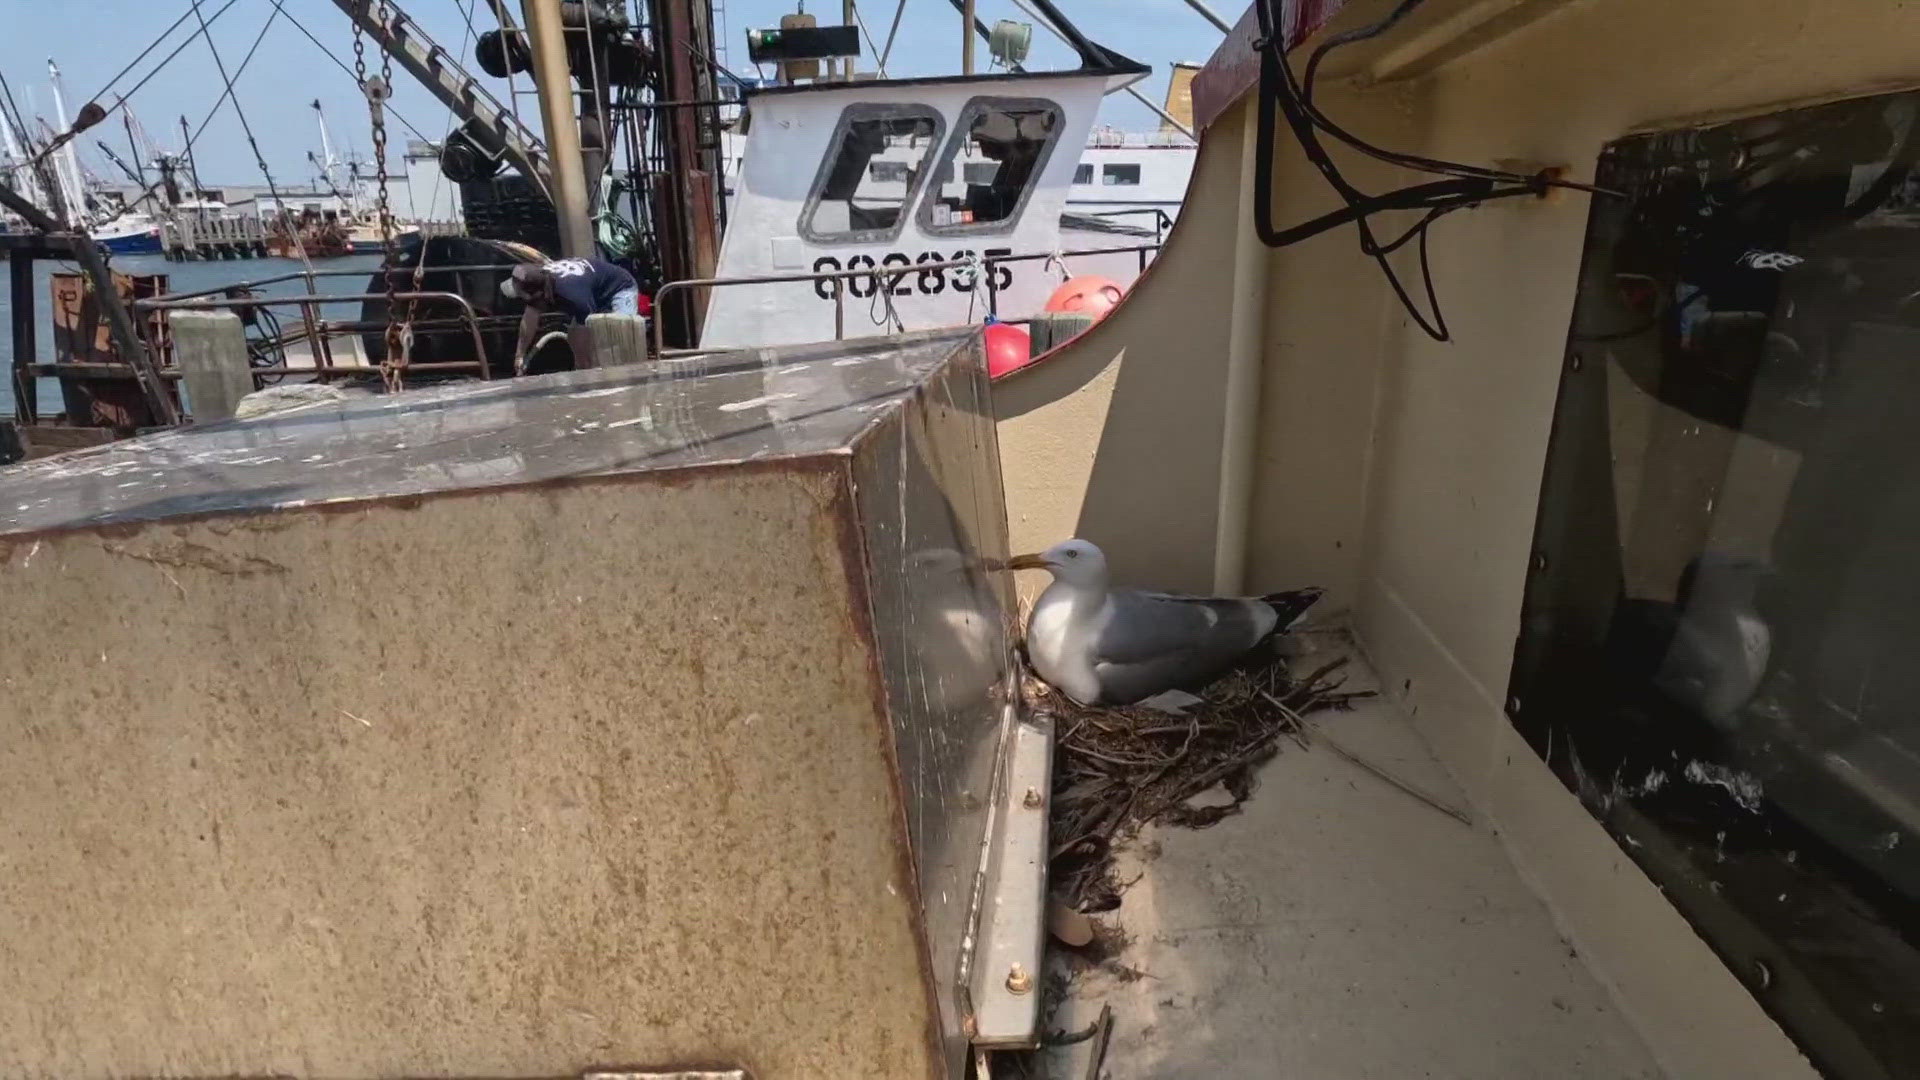 A group of fisherman found the stowaway, and now the seagull and her unhatched eggs are part of the crew.